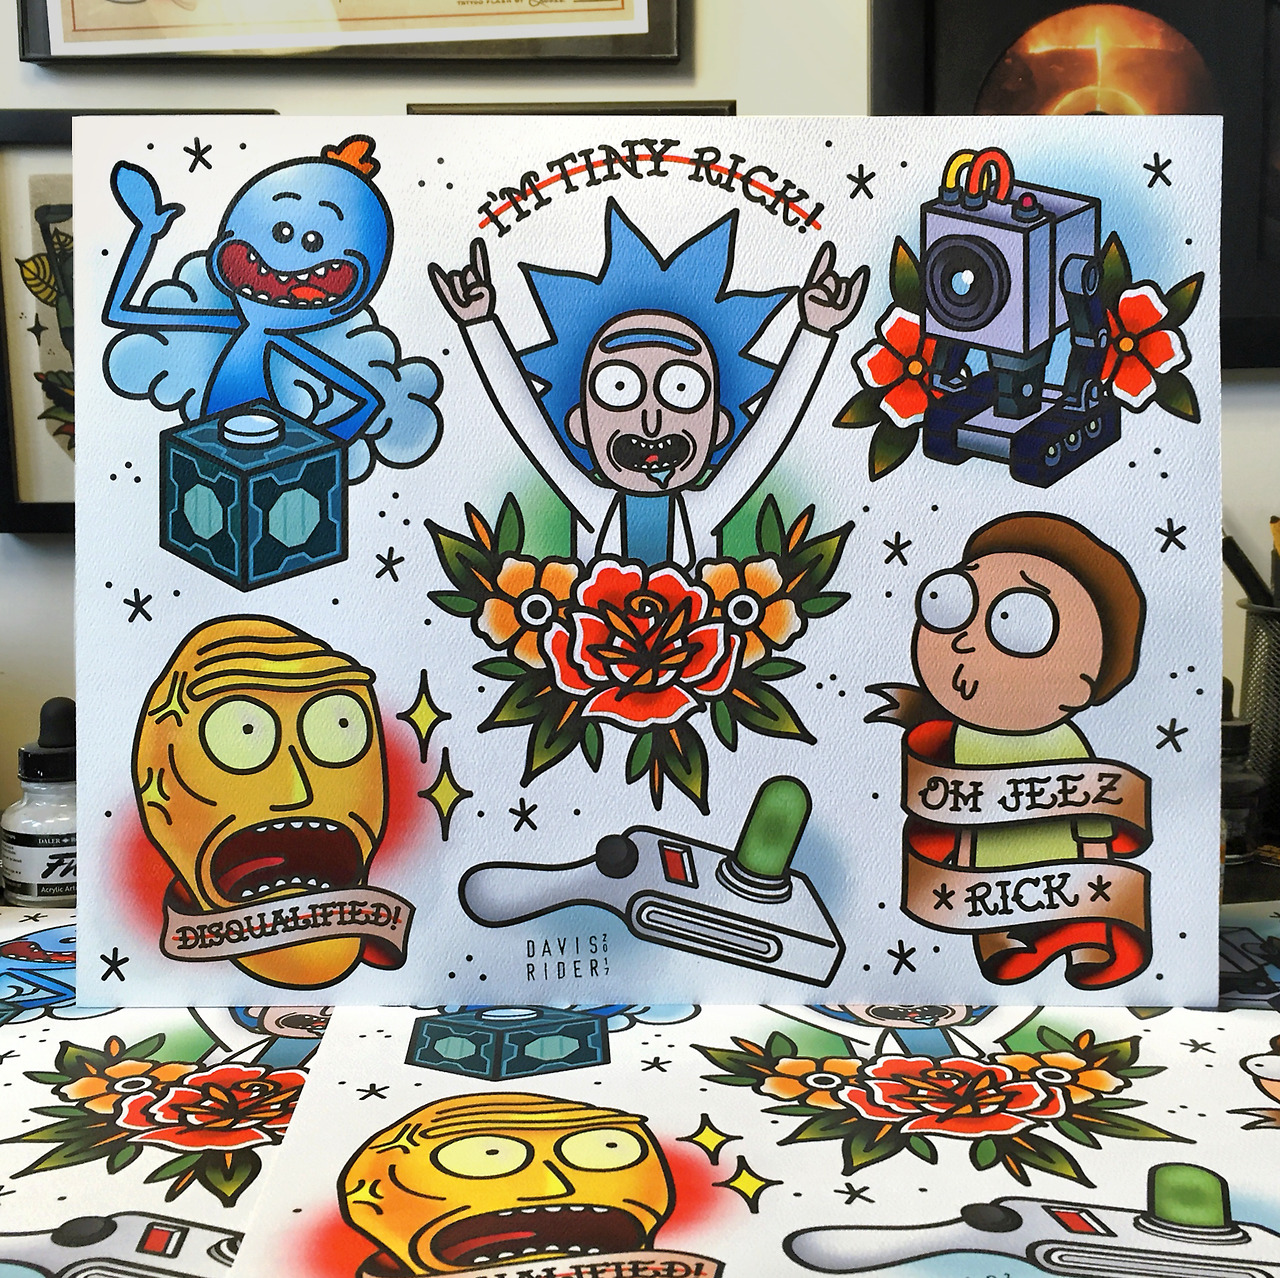 Top 63 Best Rick and Morty Tattoo Ideas  2021 Inspiration Guide  Rick  and morty tattoo Rick and morty Morty